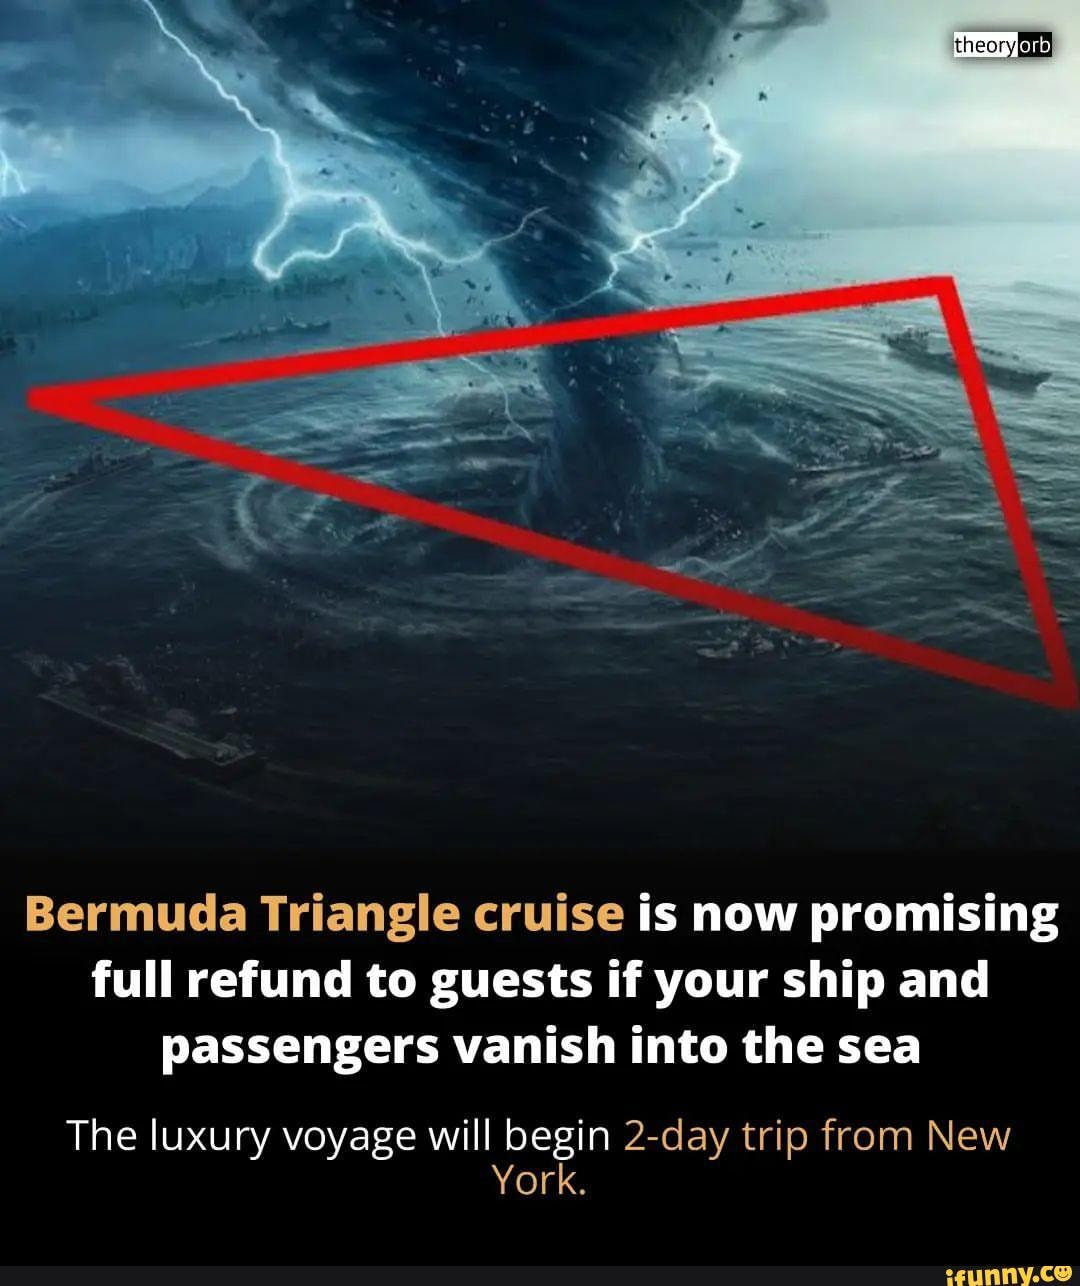 Bermuda Triangle cruise is now promising full refund to guests if your